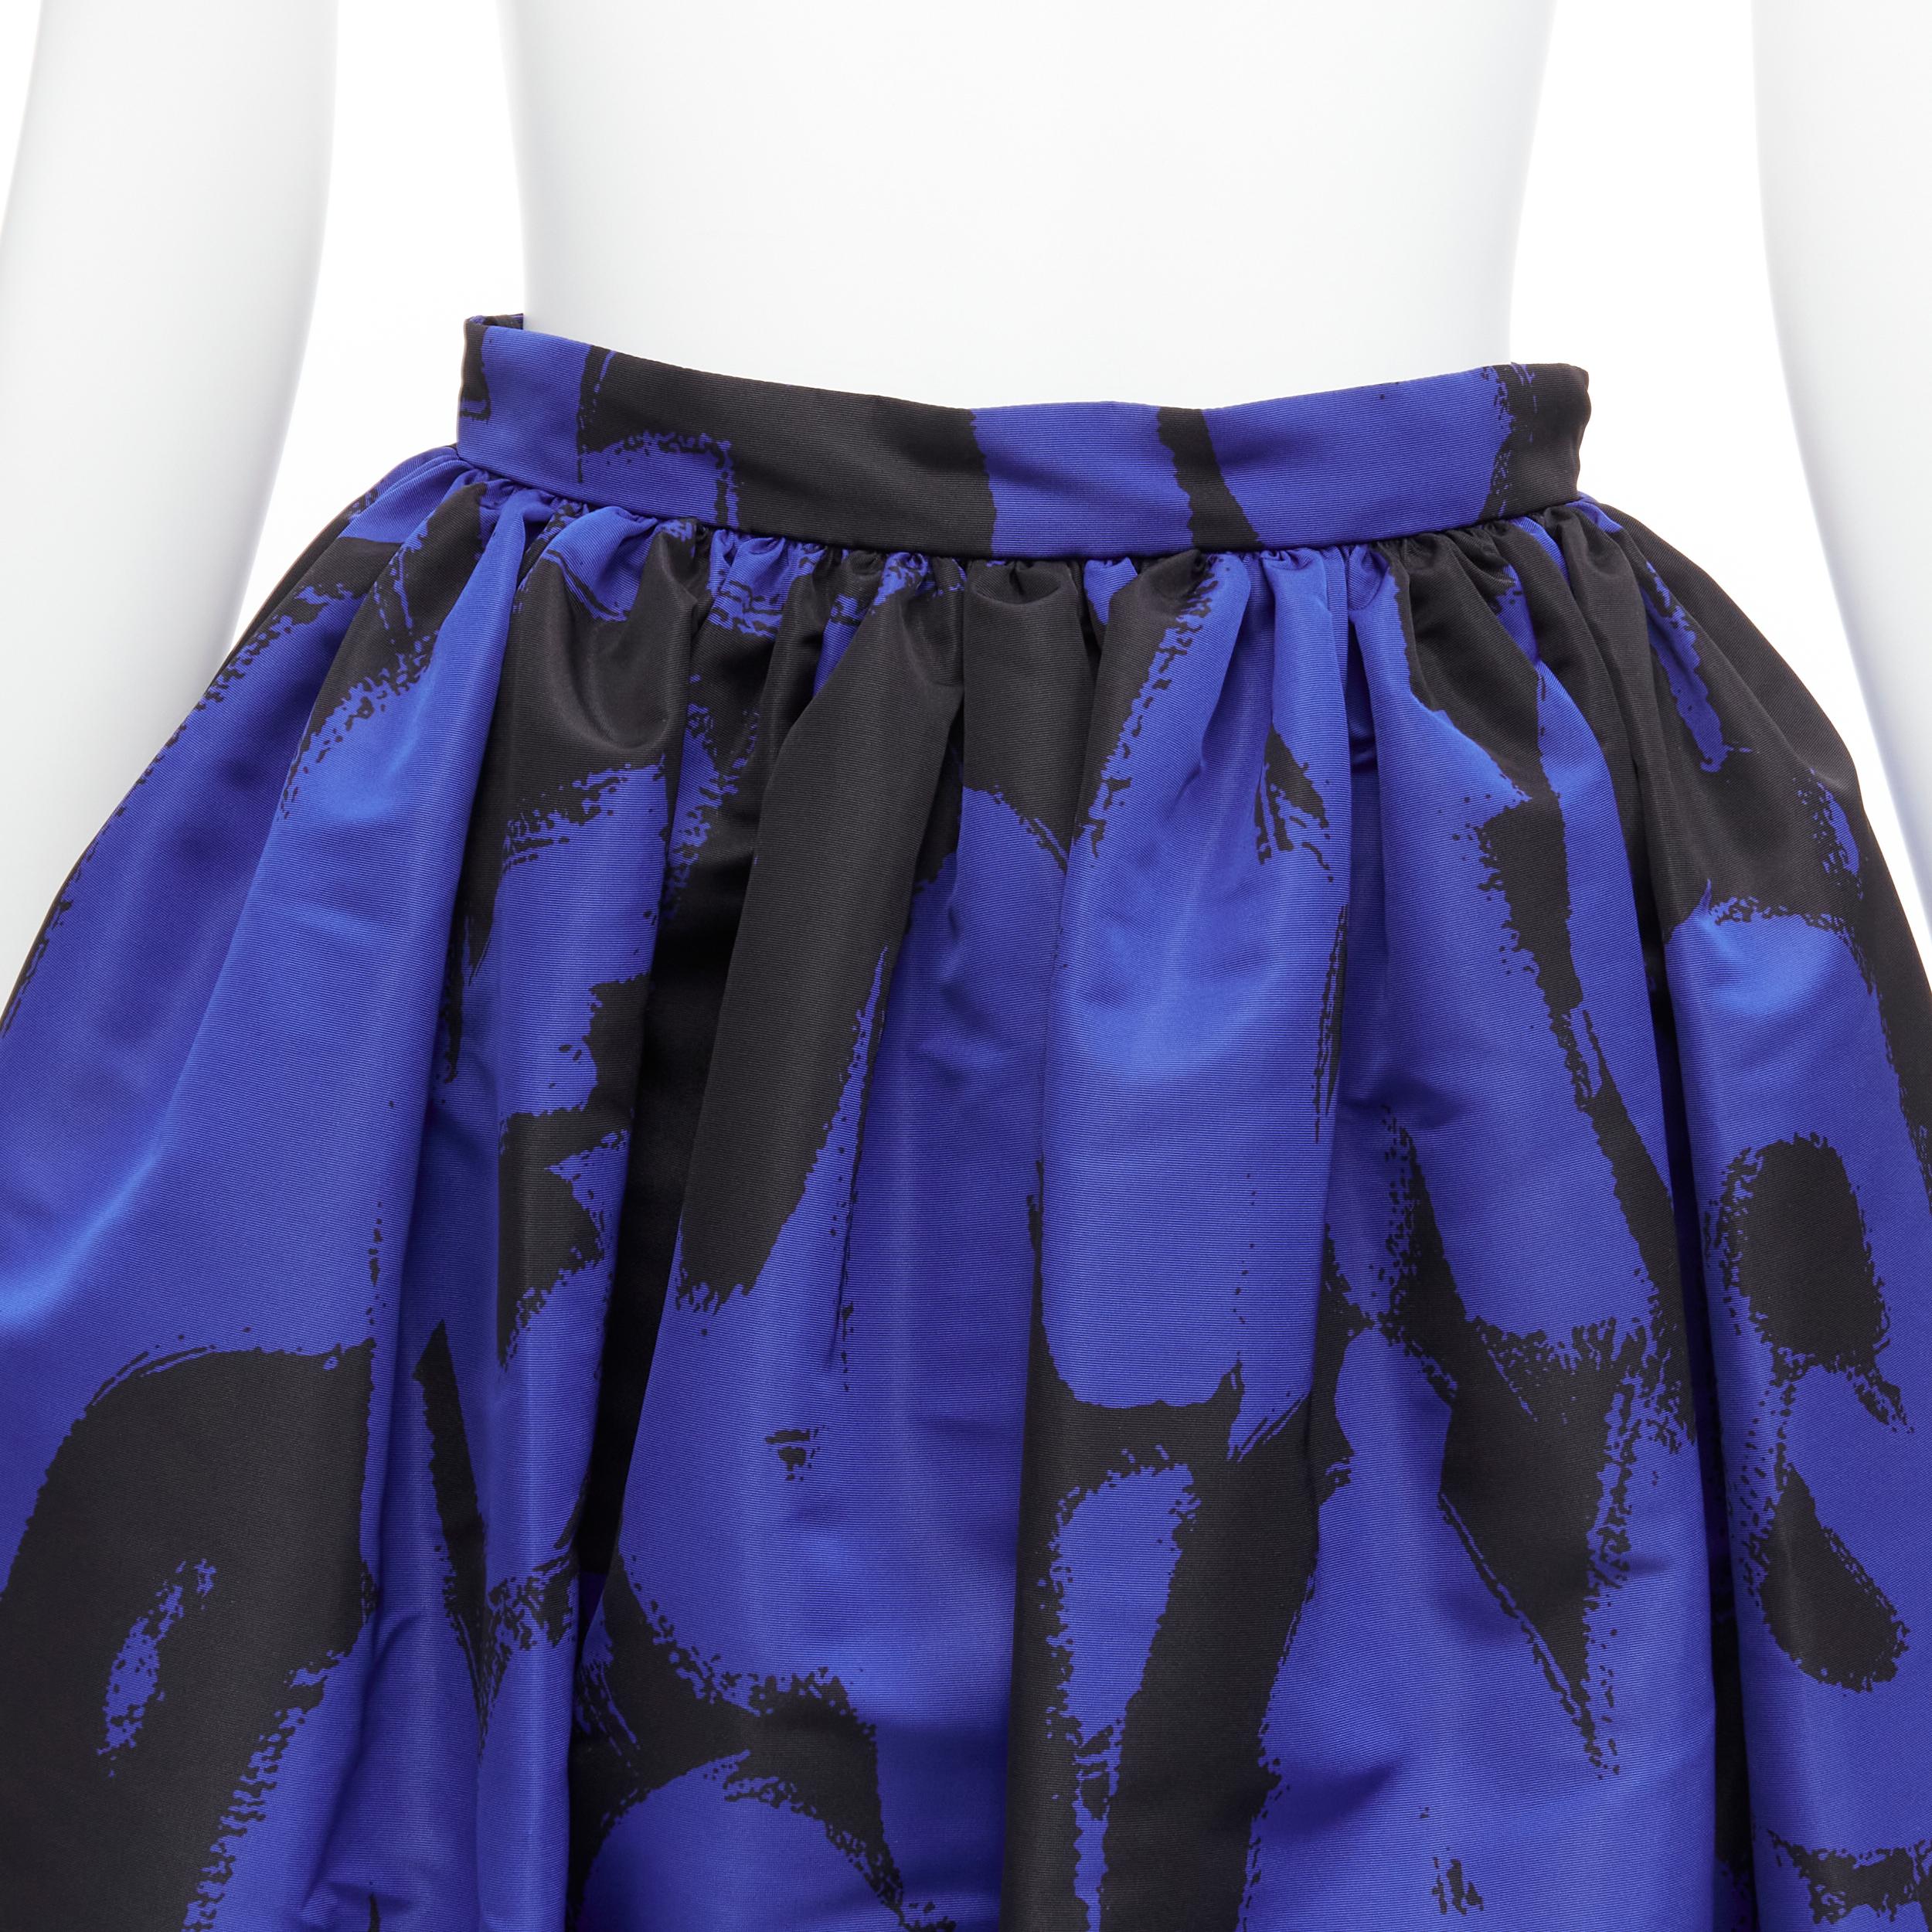 ALEXANDER MCQUEEN 2022 Brush Graffiti black blue logo letter print flared full skirt IT38 XS
Reference: AAWC/A00498
Brand: Alexander McQueen
Designer: Sarah Burton
Collection: 2022
Material: Polyester
Color: Blue, Black
Pattern: Abstract
Closure: